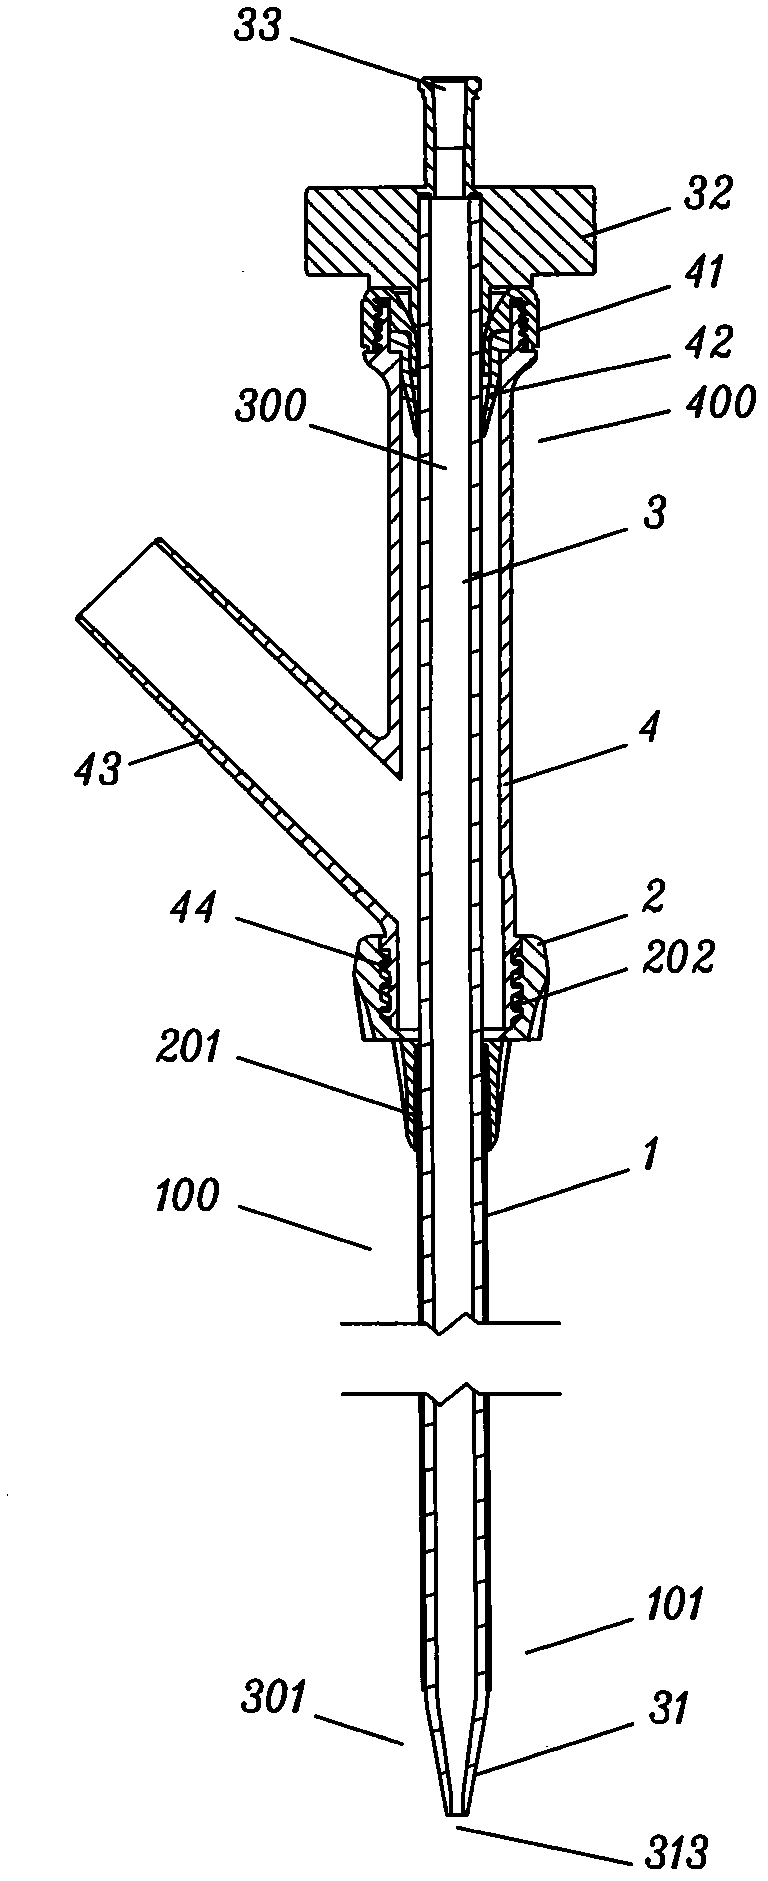 Hard lens calculus removing device